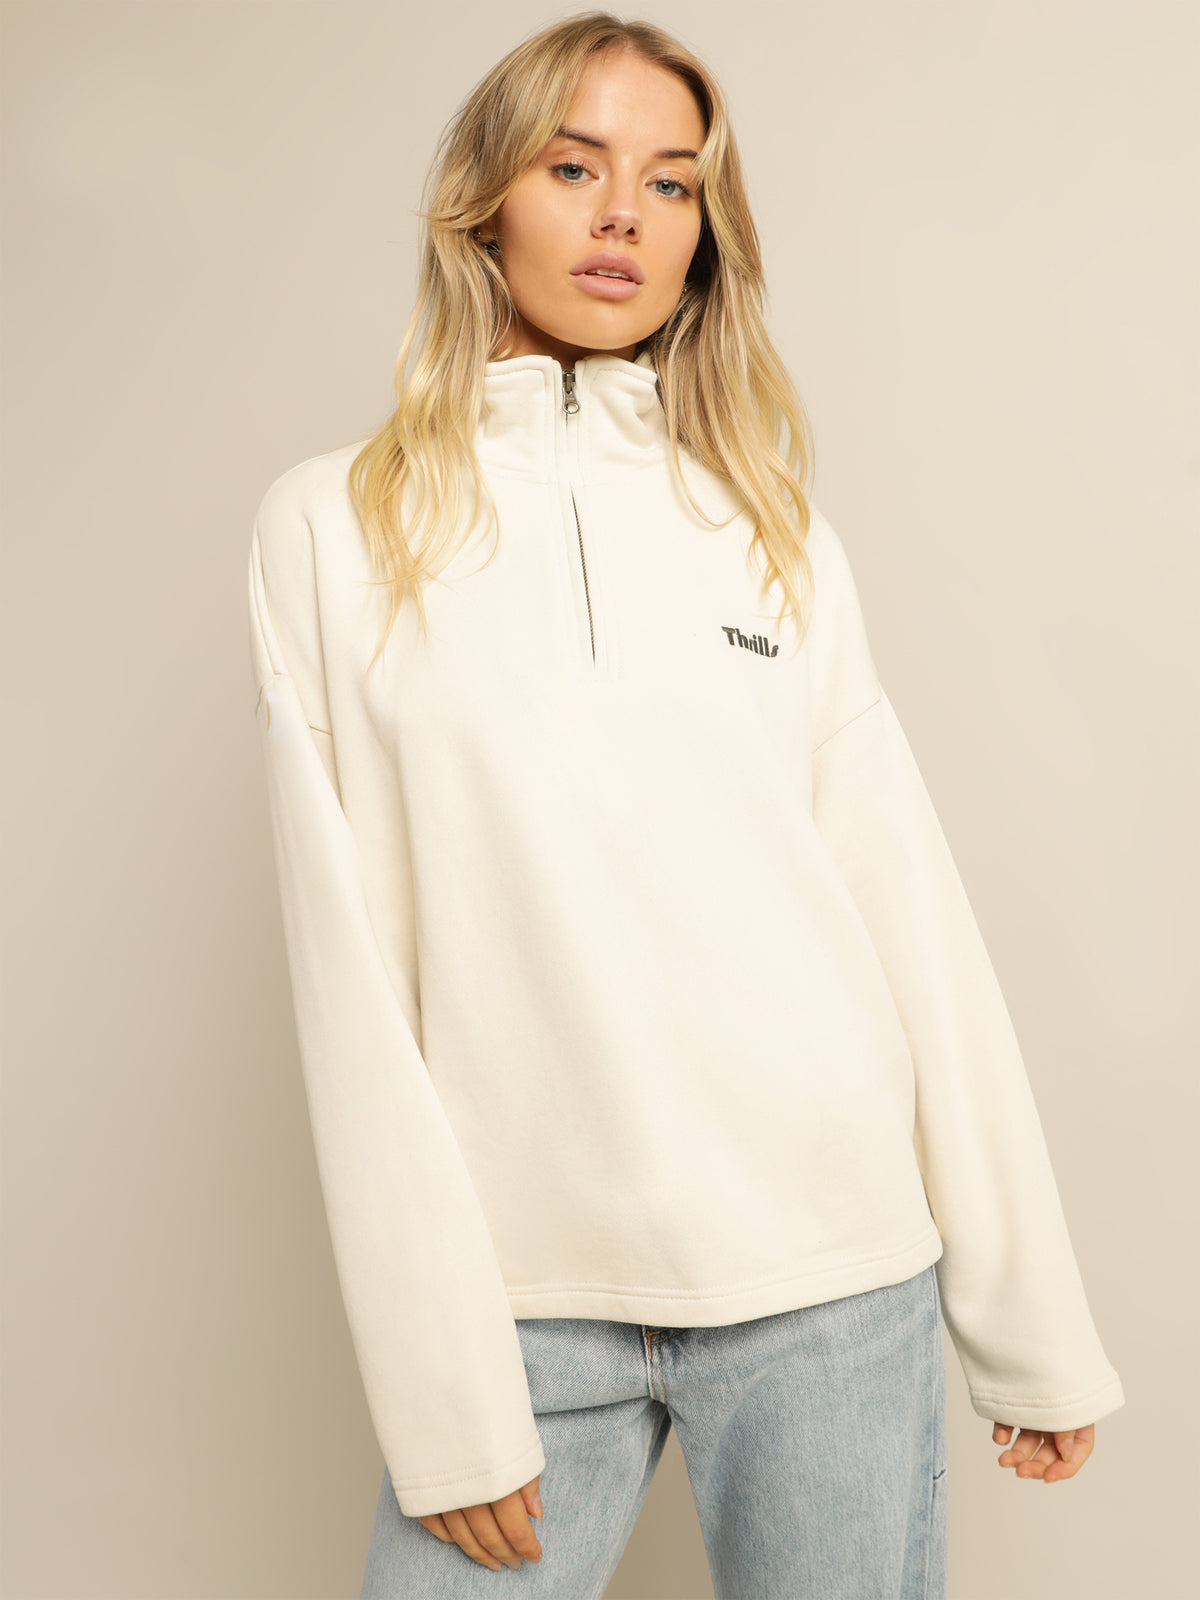 Thrills Limitless 3/4 Zip Pullover in Heritage White